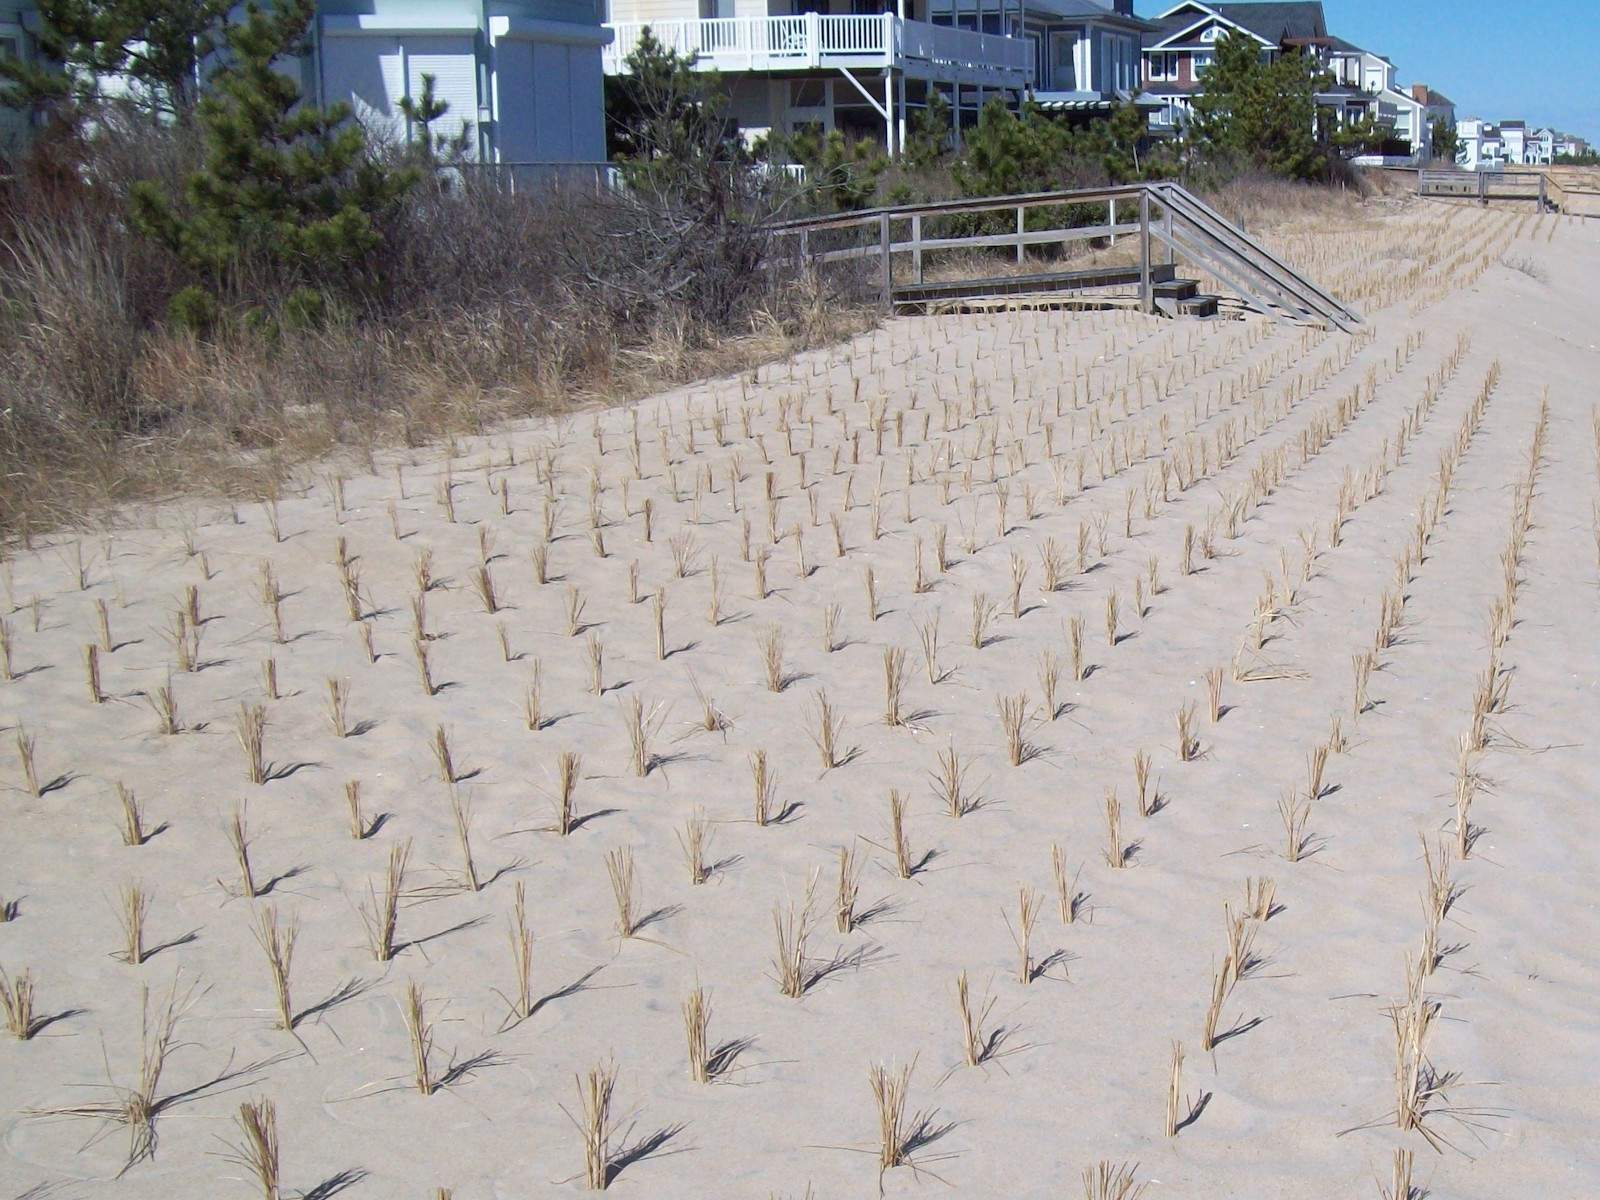 Newly planted culms of Cape American beach grass